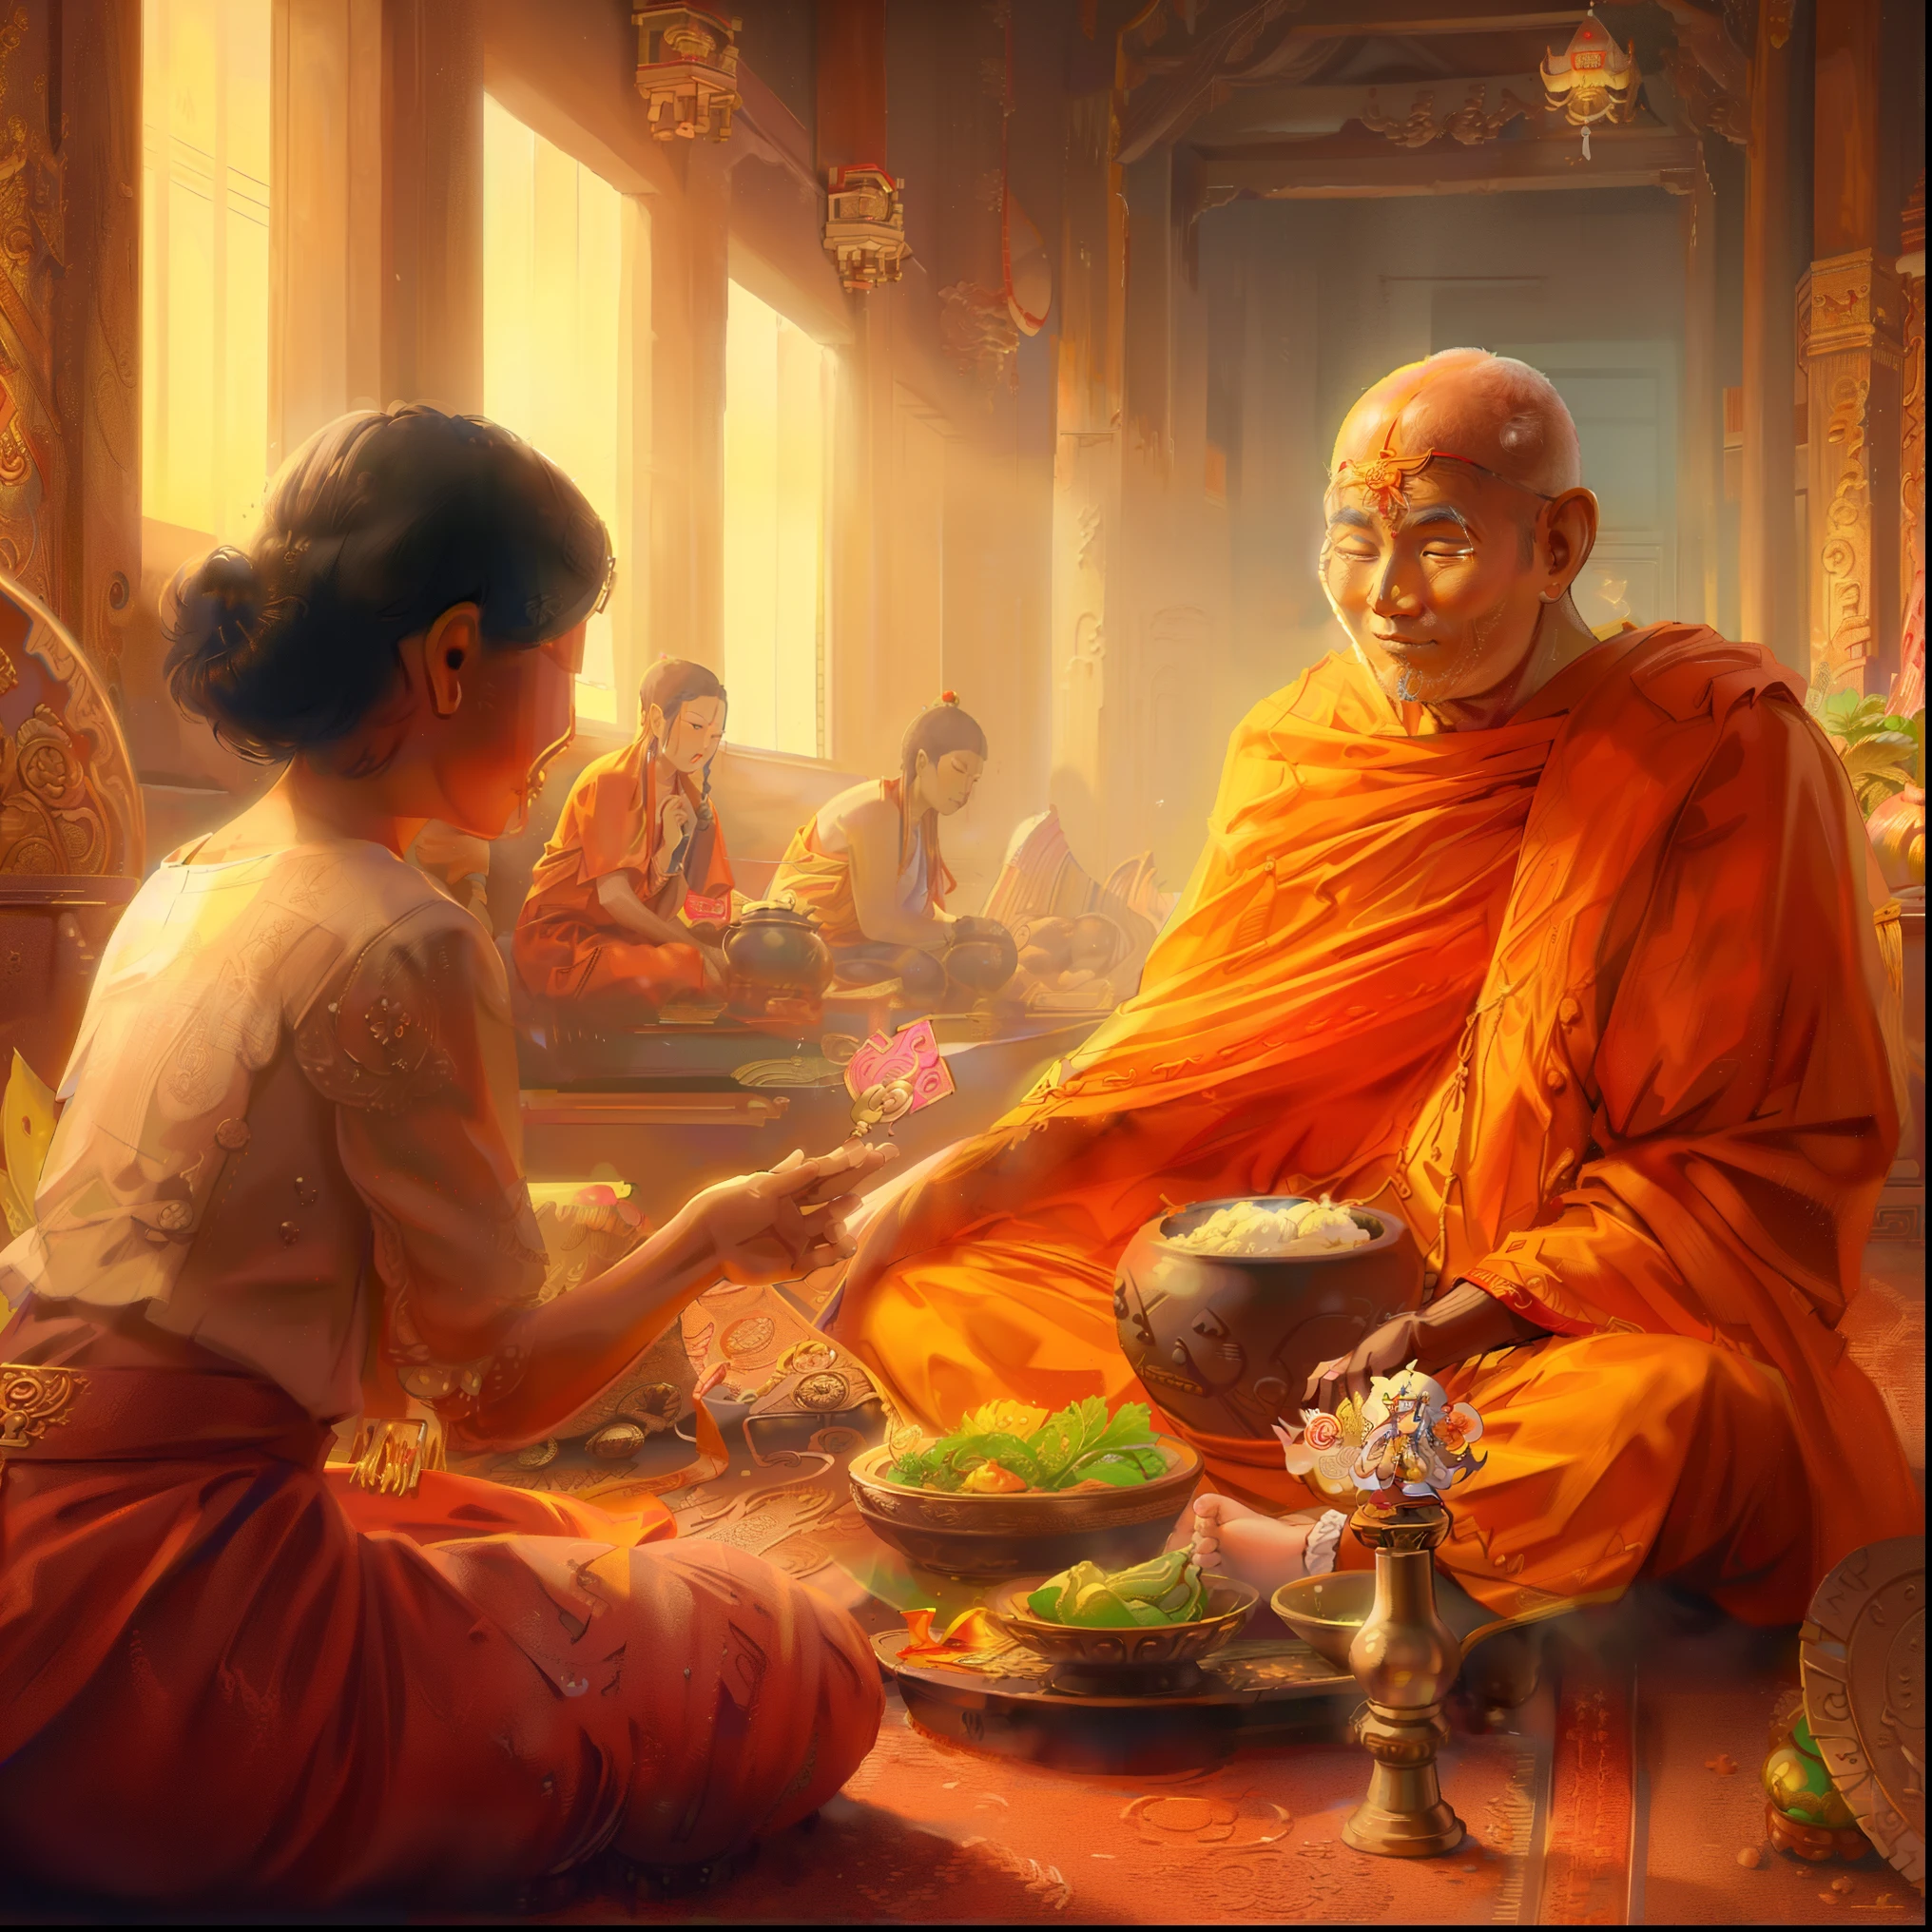 buddhist monk giving food to a young girl in a temple, tithi luadthong, by John La Gatta, buddhist, thailand art, buddhist monk, beautiful depiction, by Pablo Munoz Gomez, by Alexander Kucharsky, begging for alms, buddhism, monk meditate, buddhist monk meditating, by Harrington Mann, by Raymond Han, in a temple